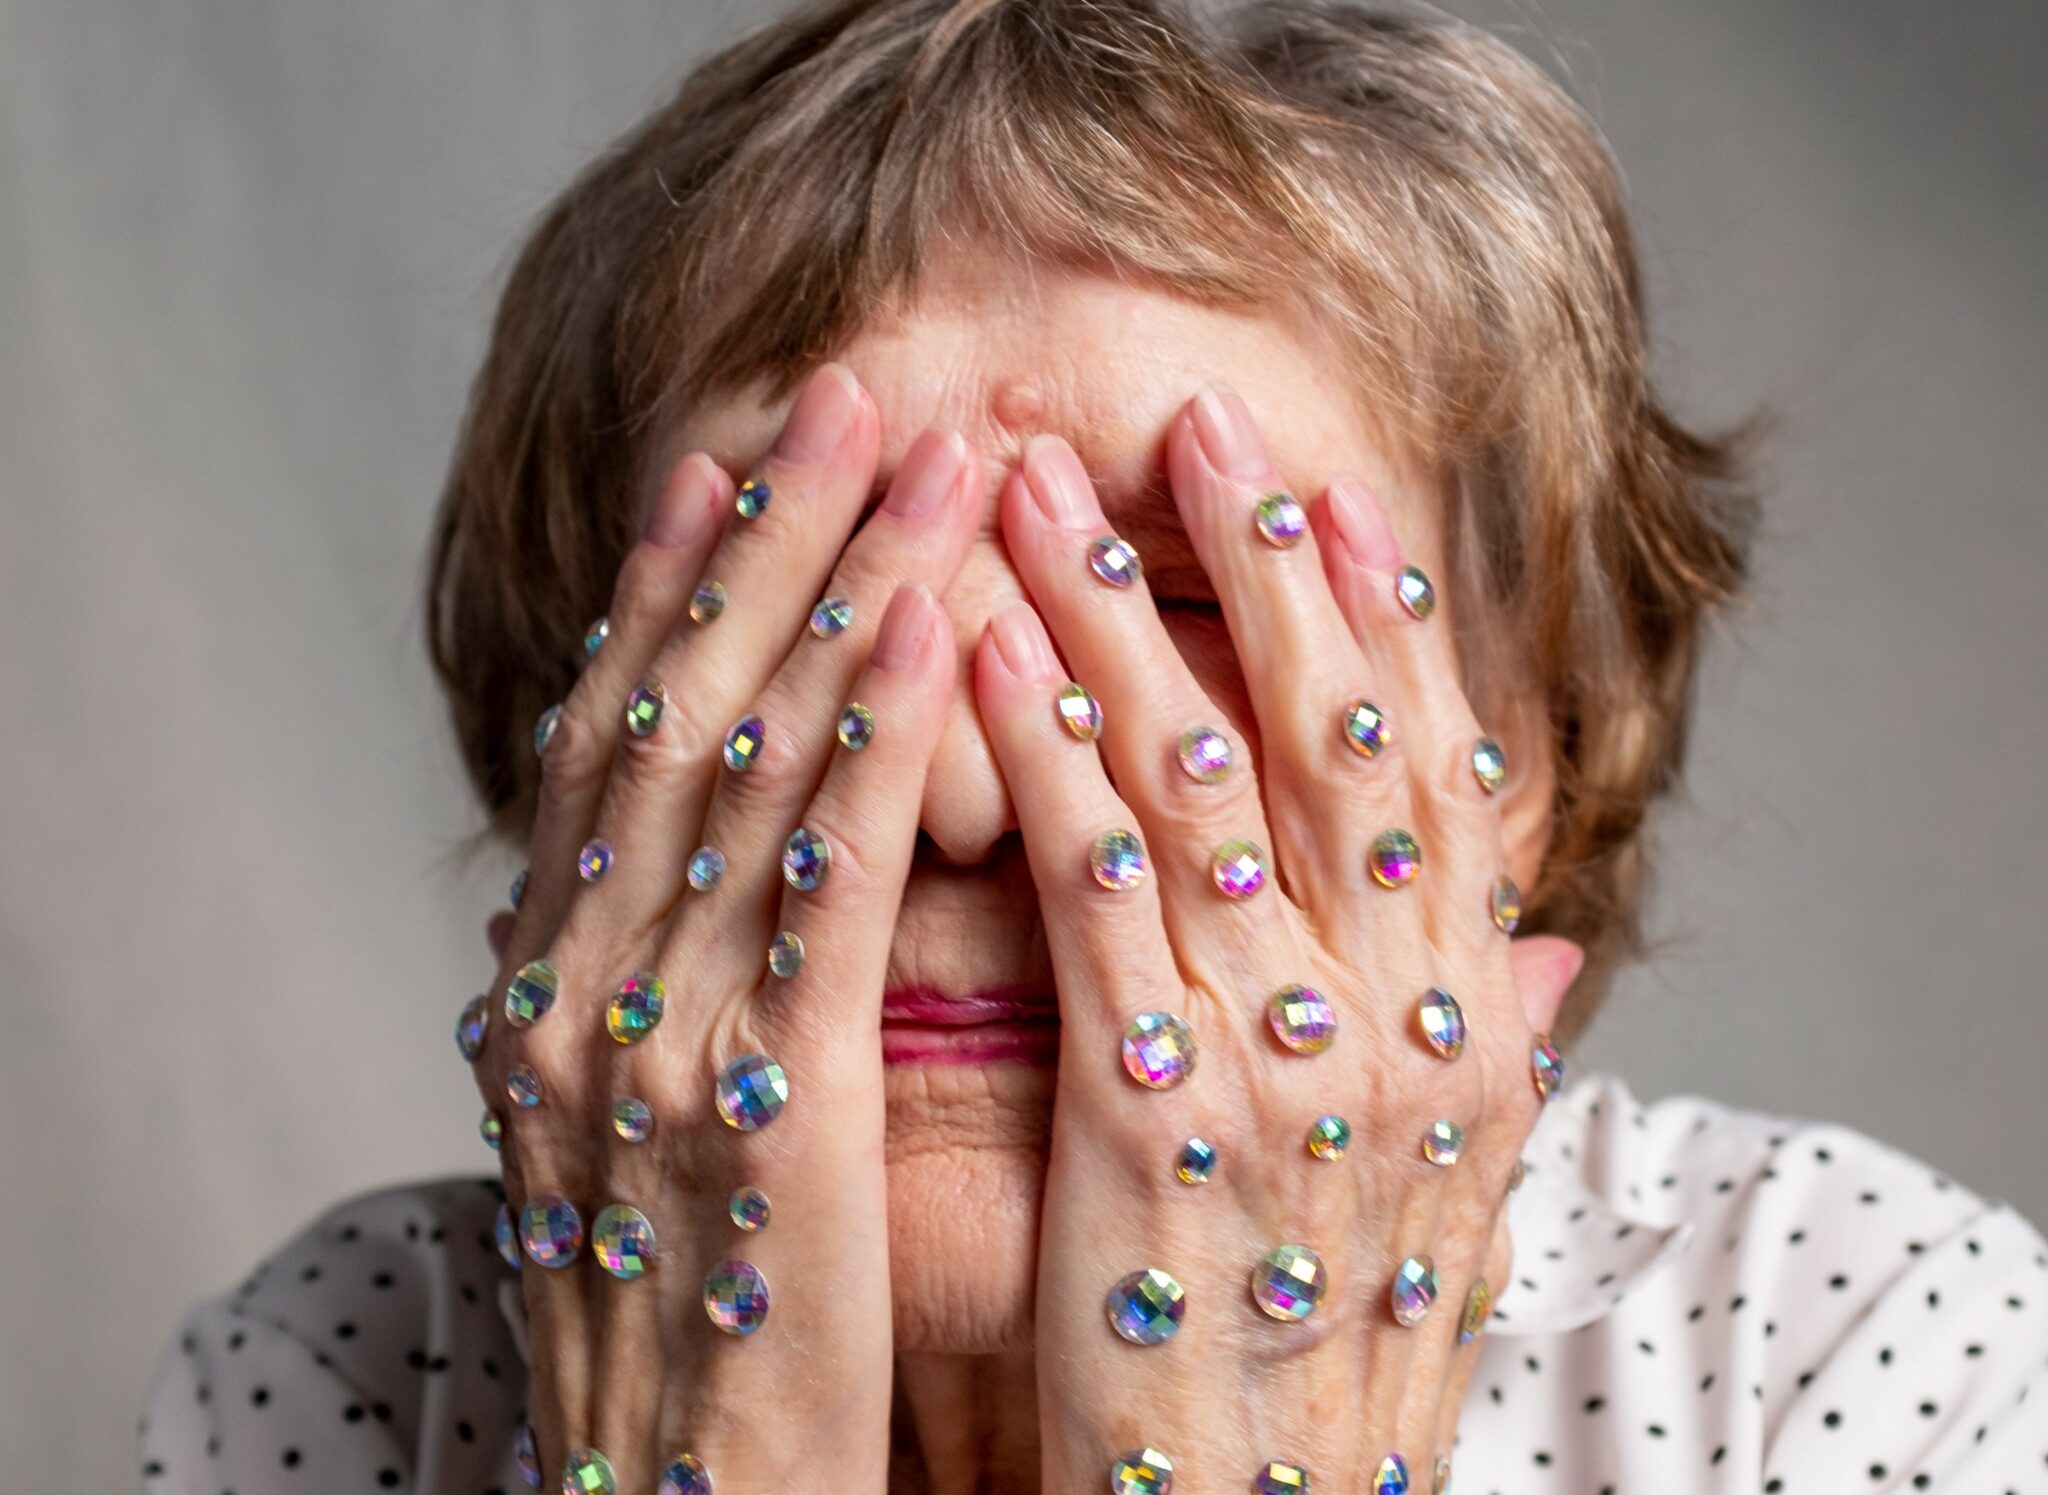 An older woman holding her face with rhinestone-covered hands.